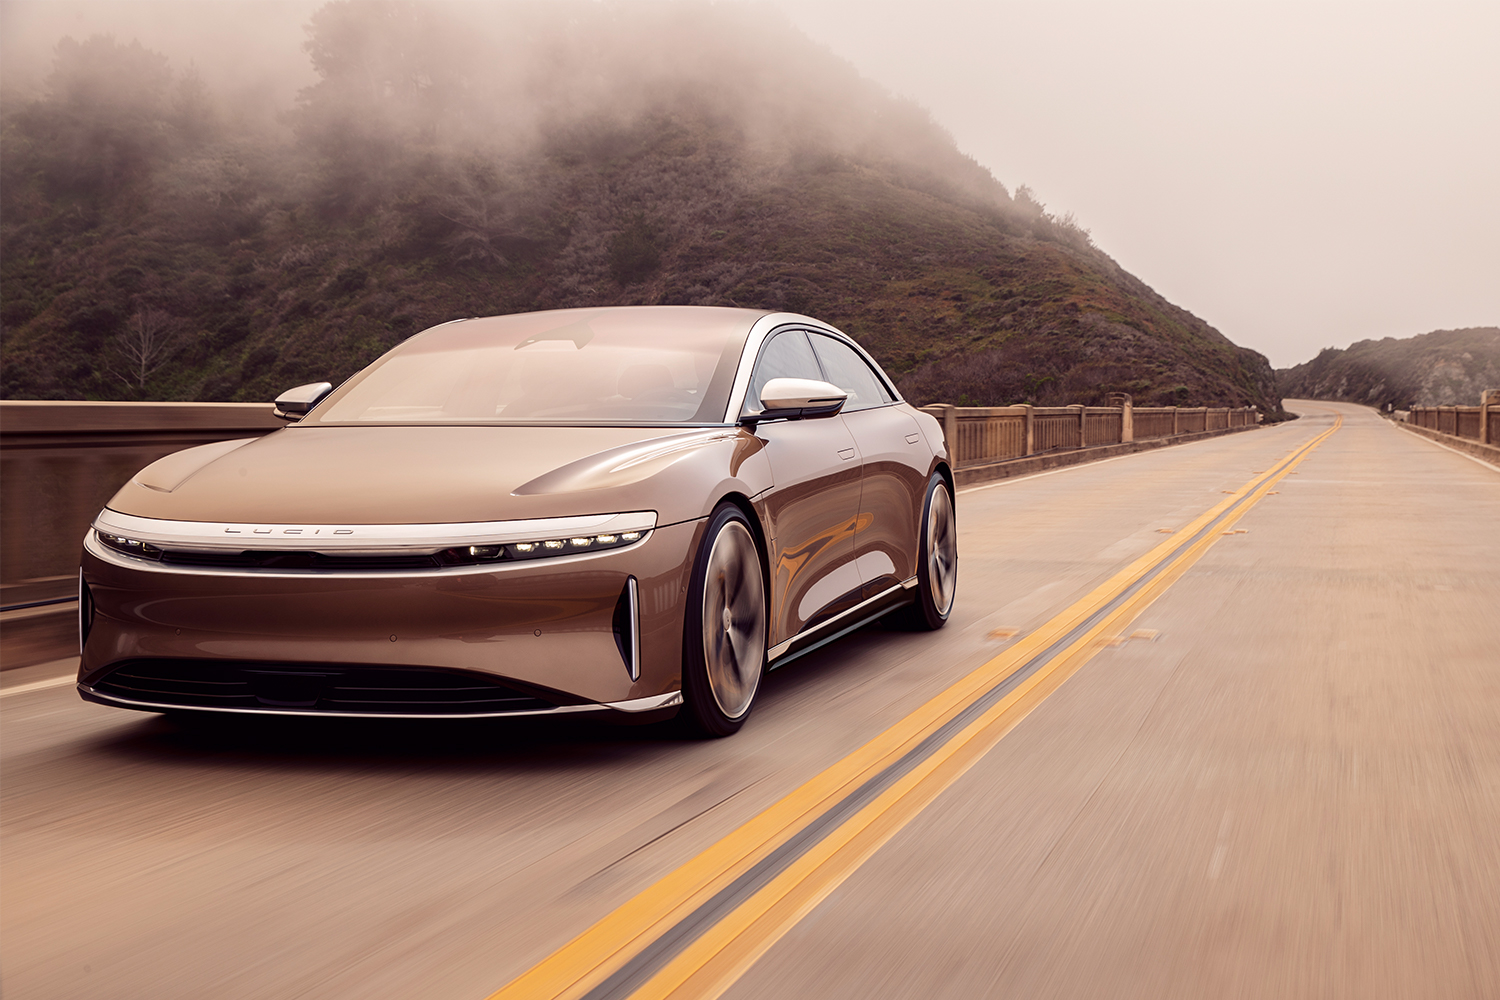 The Lucid Air electric car driving across a bridge in foggy conditions. The Lucid Air Dream Edition Range got official EPA range in September 2021.